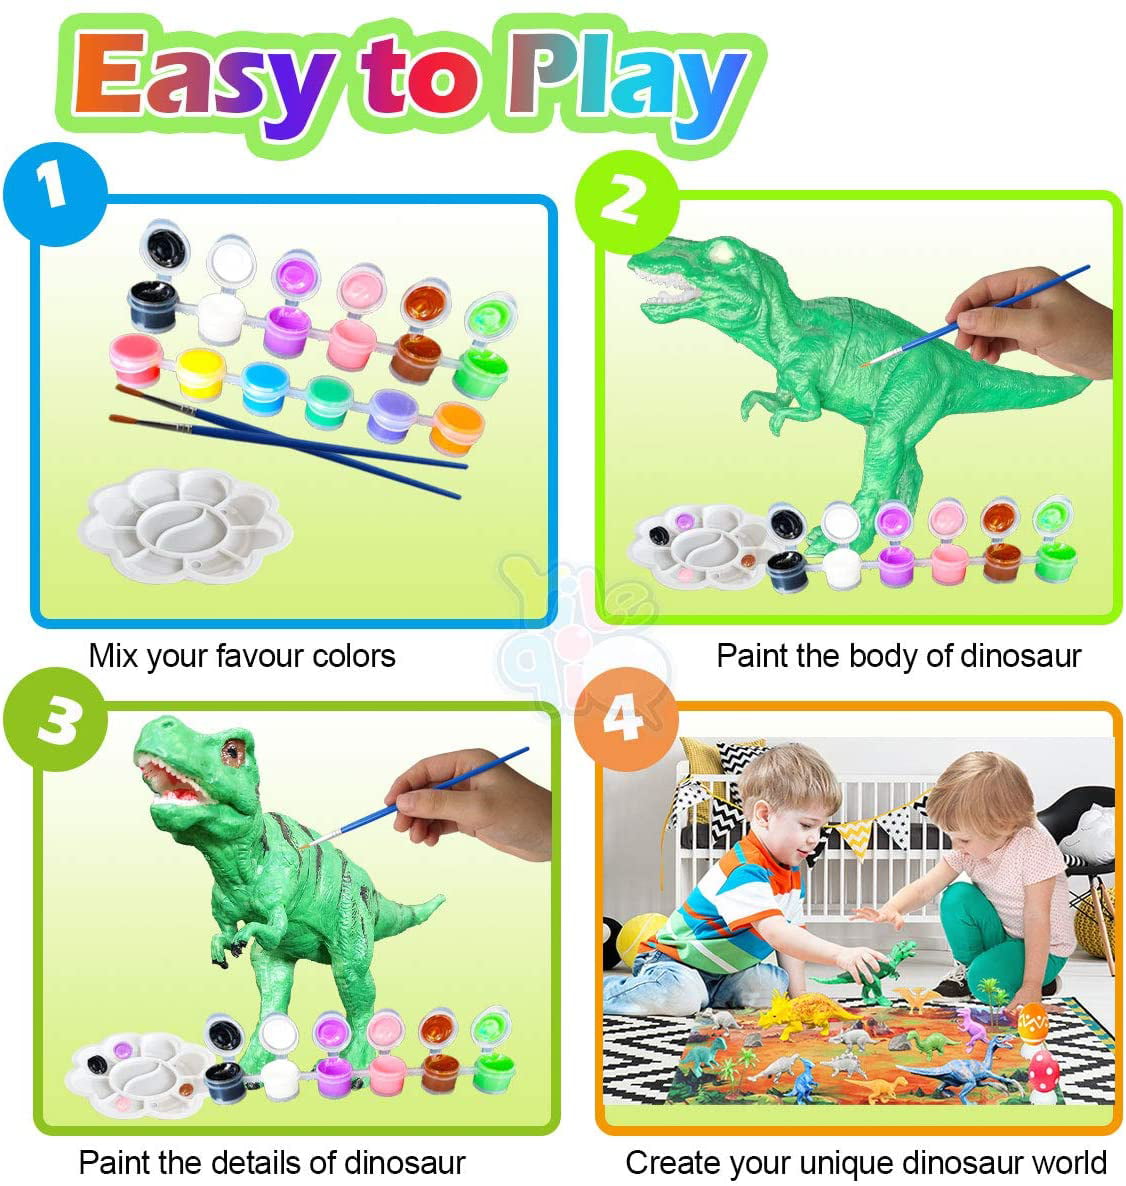 Kids Crafts Dinosaur Painting Kit by Coastline Craft (Ages 3+) Paint Your Own Dinosaur Toys Activity Kit w/ Kid-Safe Washable Paint, Brushes, T-Rex